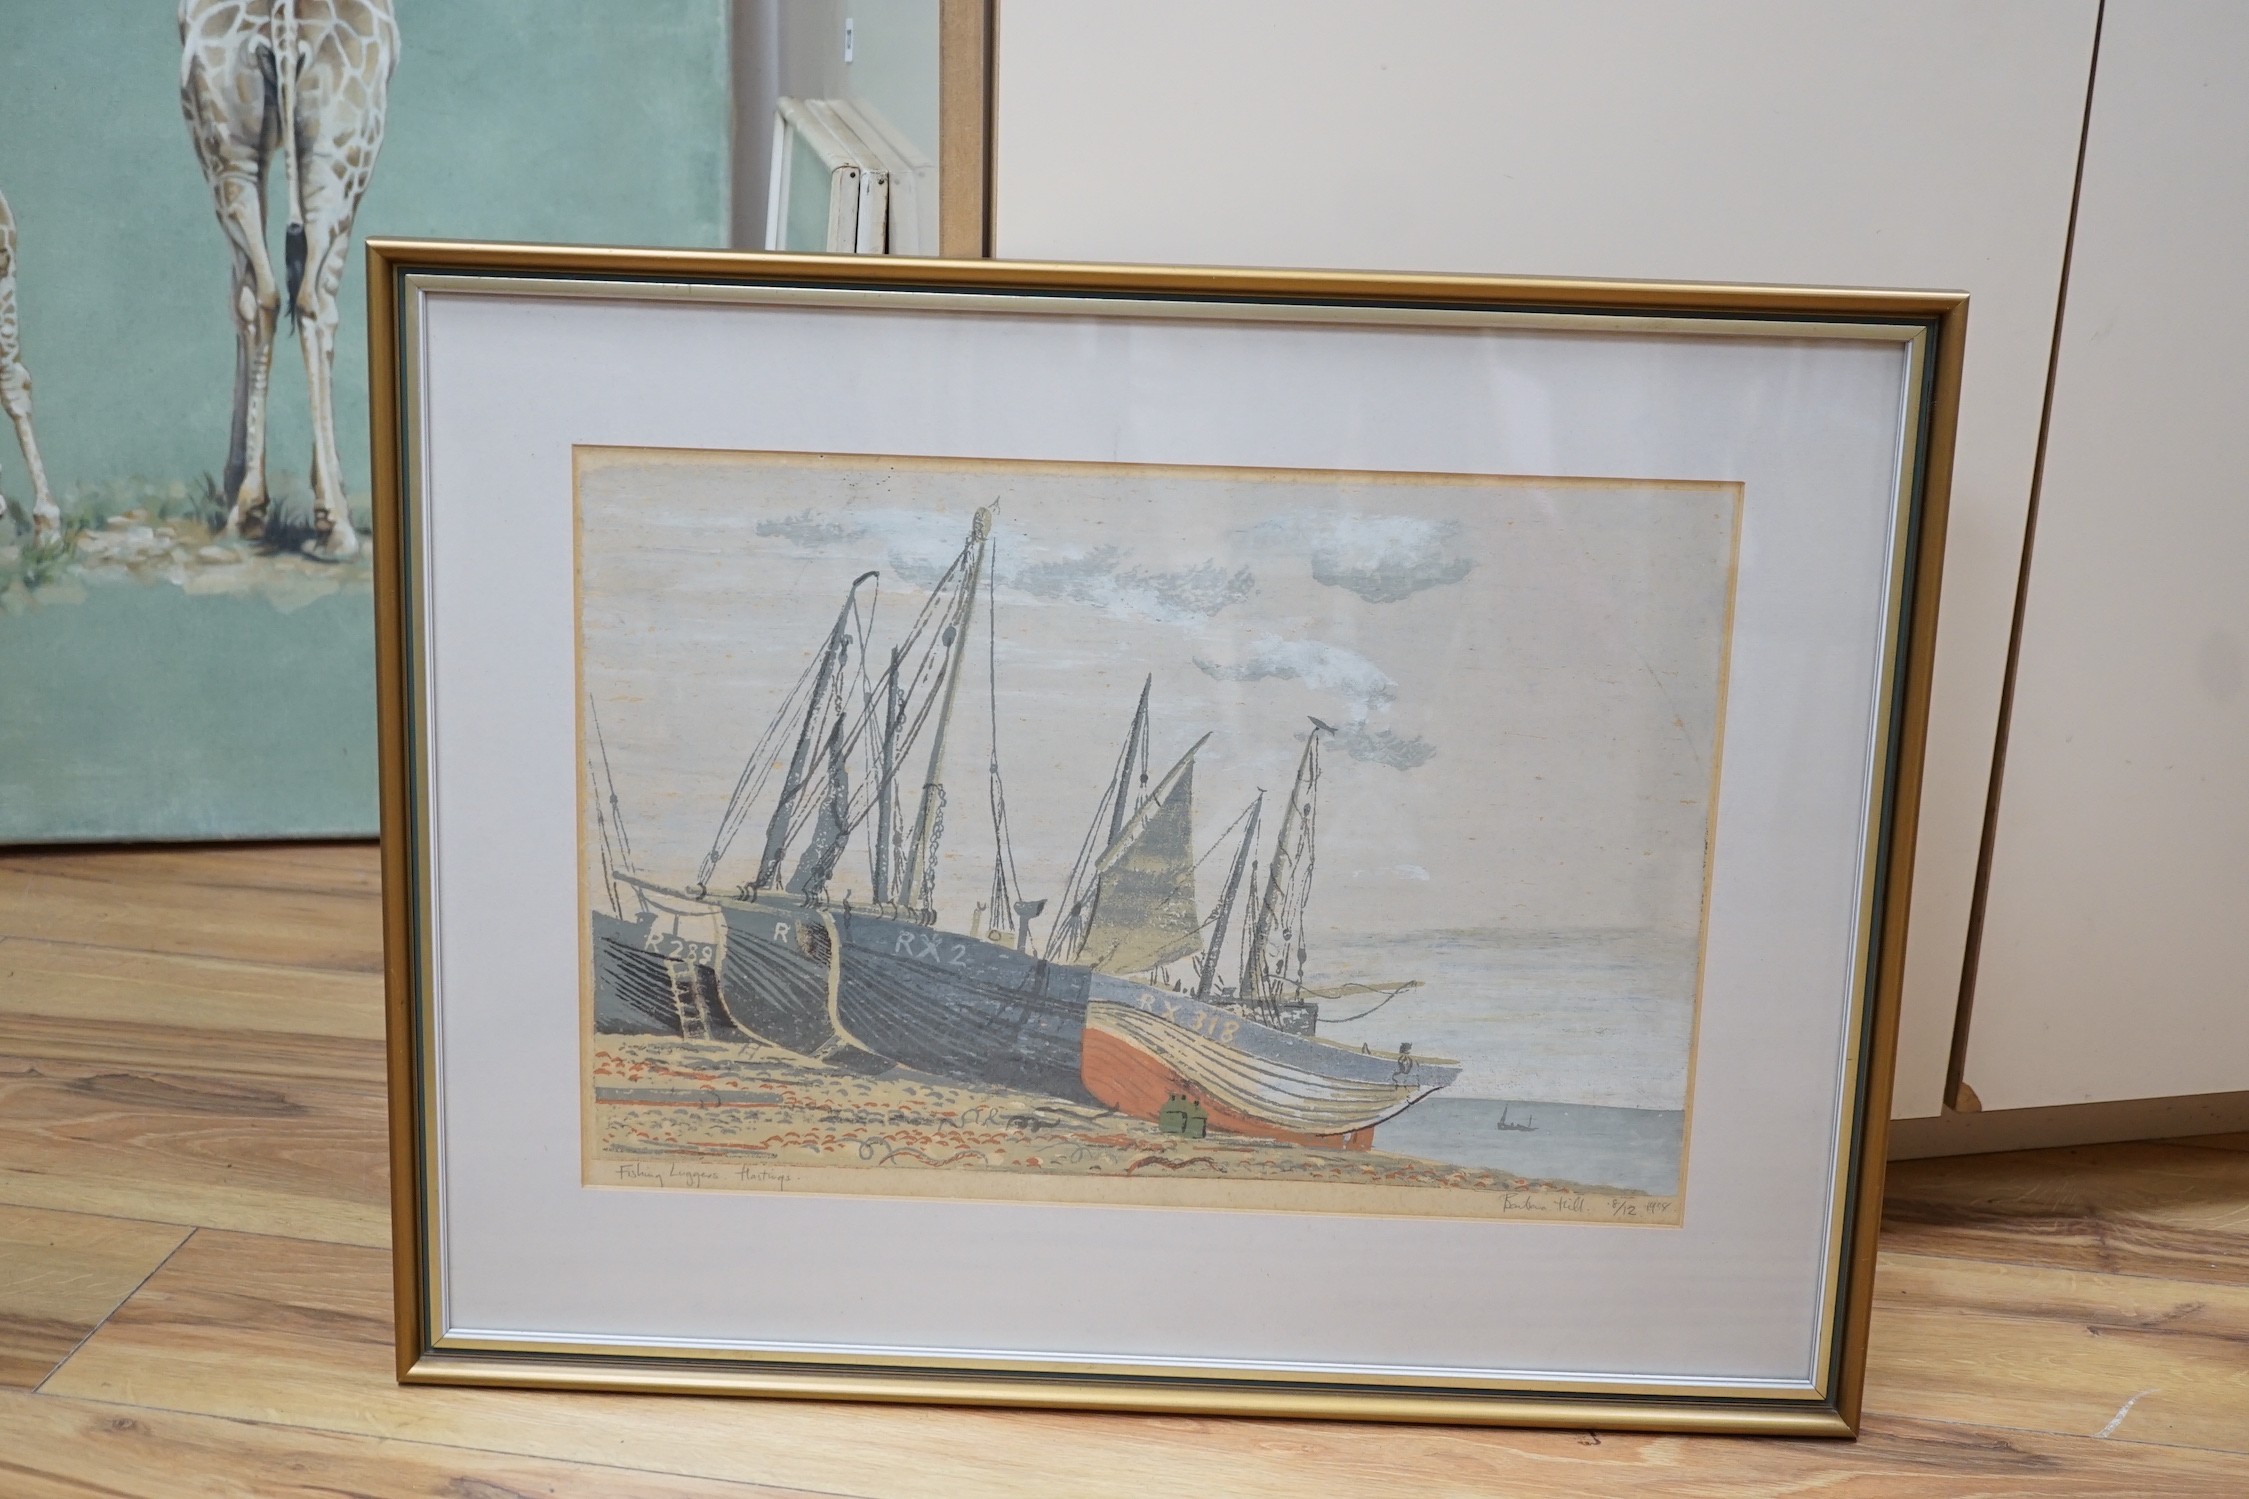 Barbara Hill, limited edition print, 'Fishing Luggers, Hastings, signed and dated 1958, 8/12, 31 x 49cm